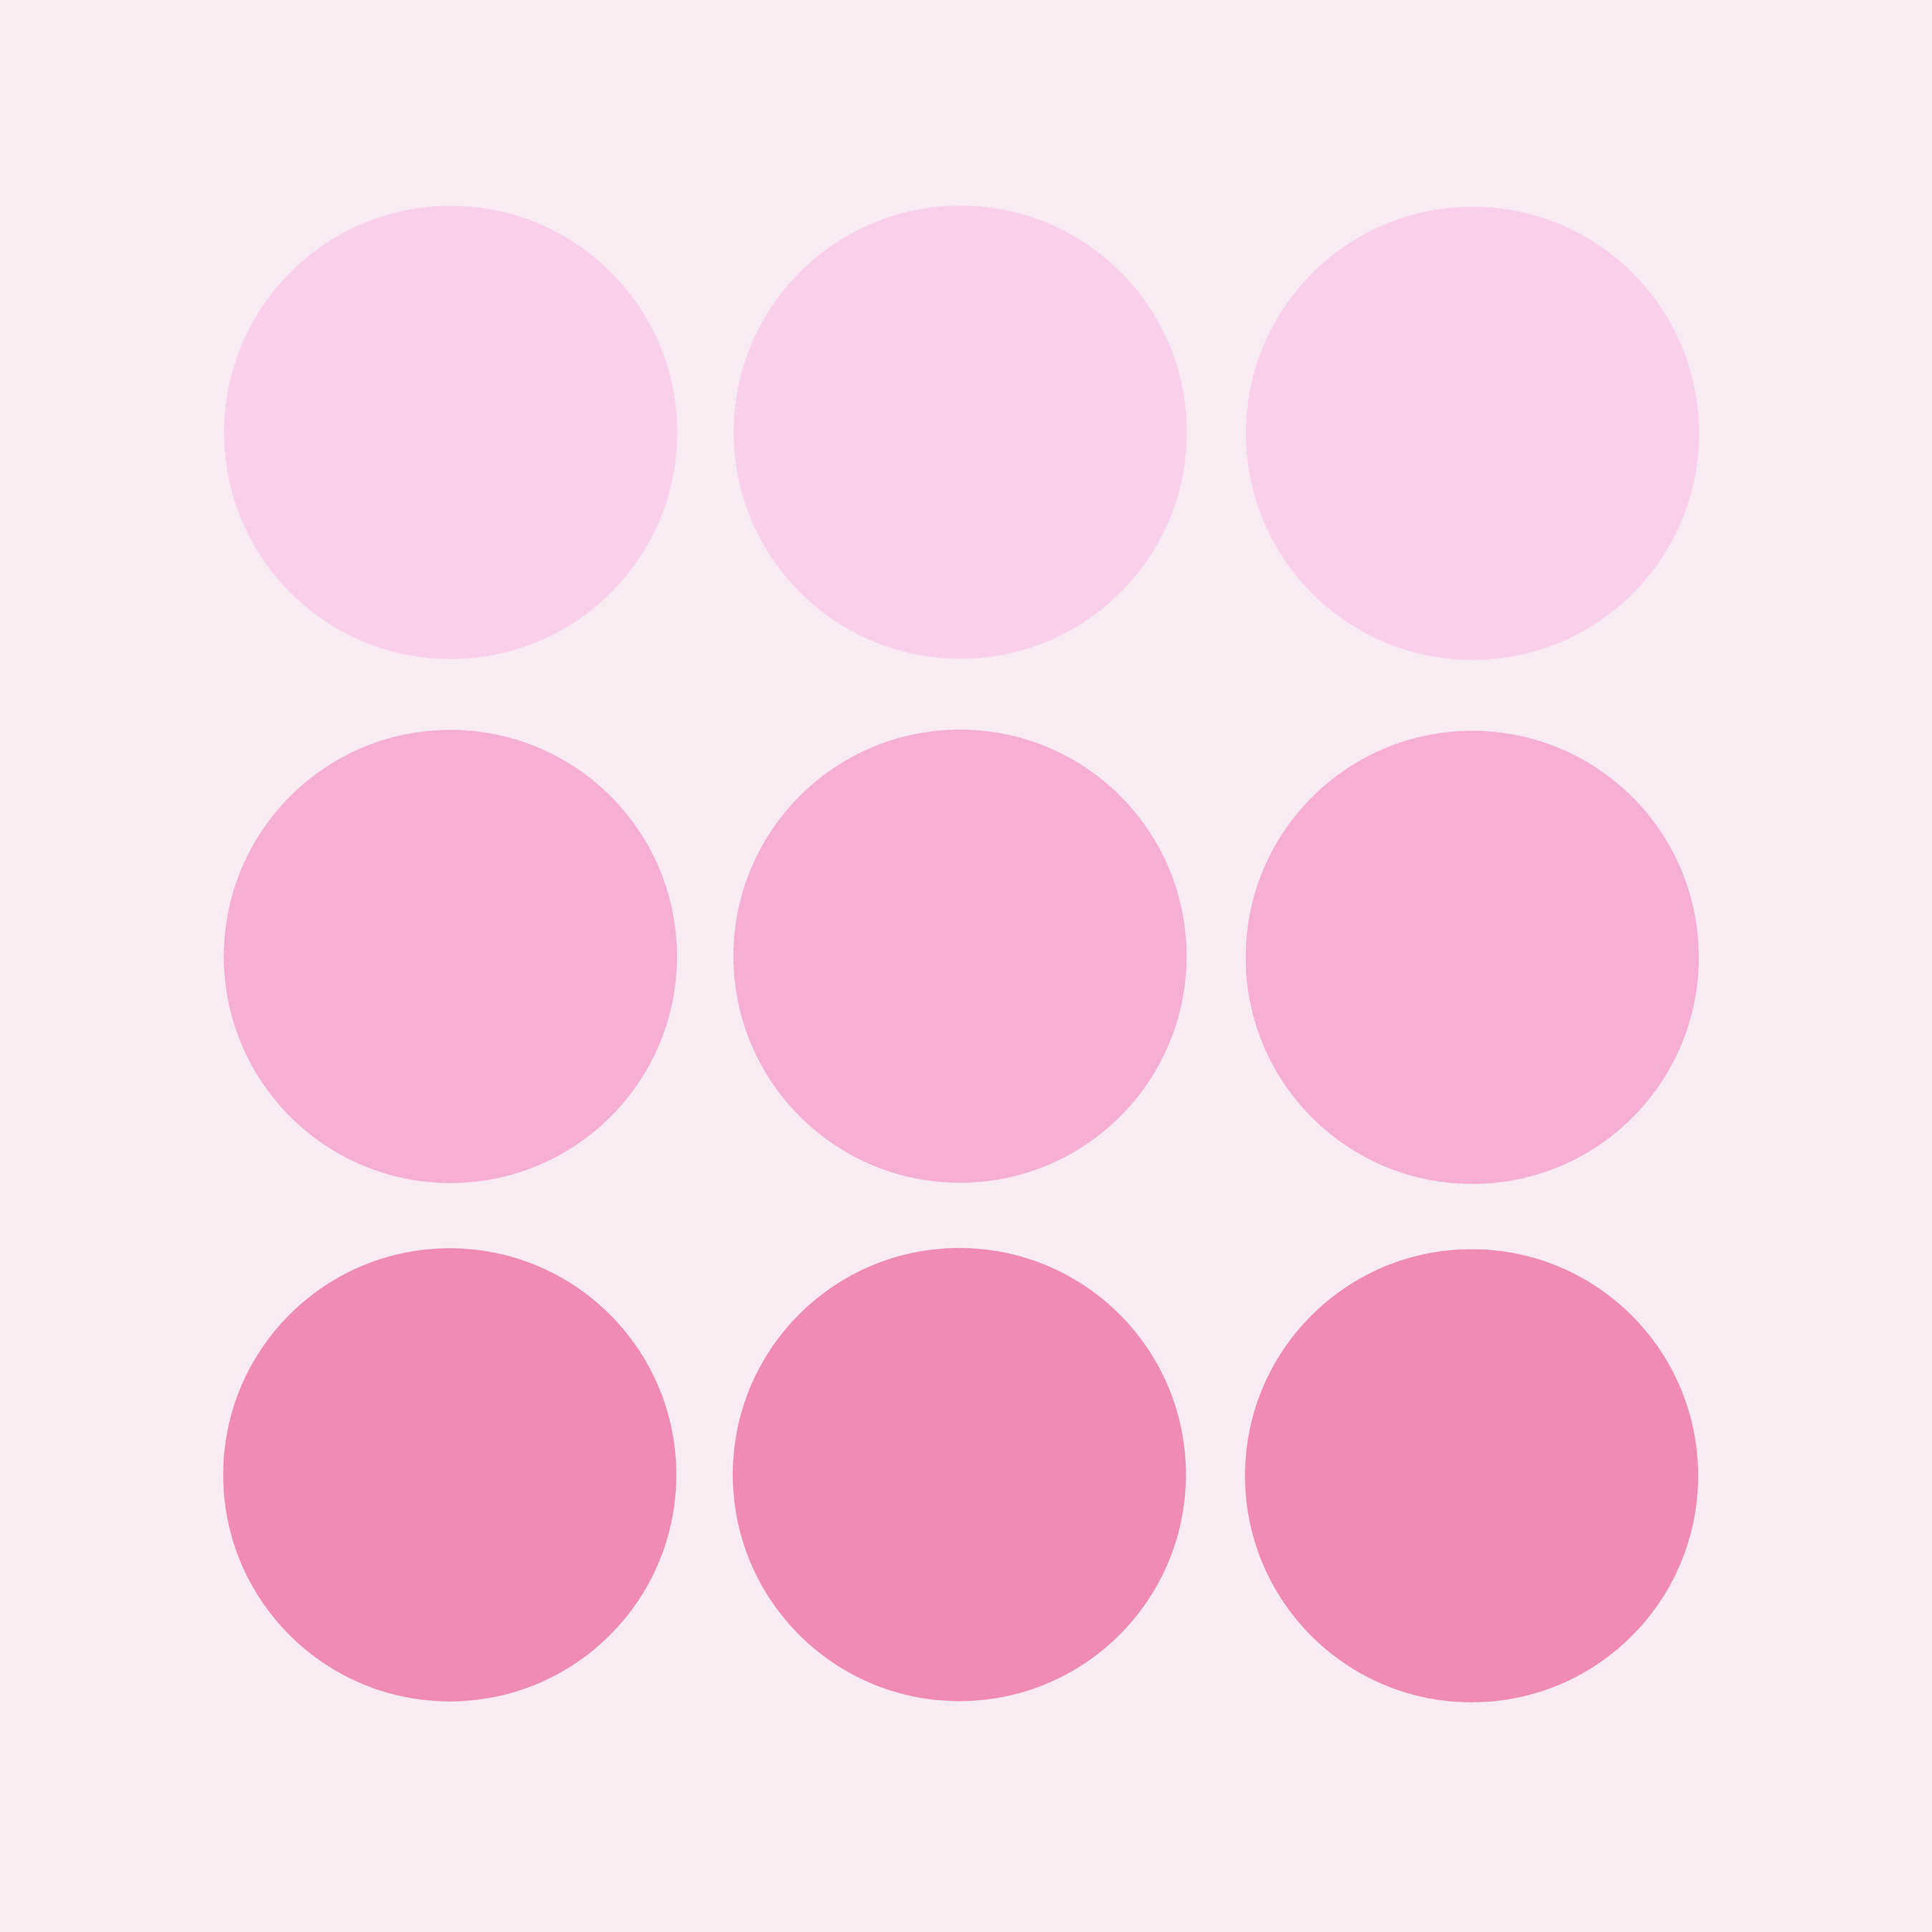 art every day number 460 / digital graphics / pink dots three